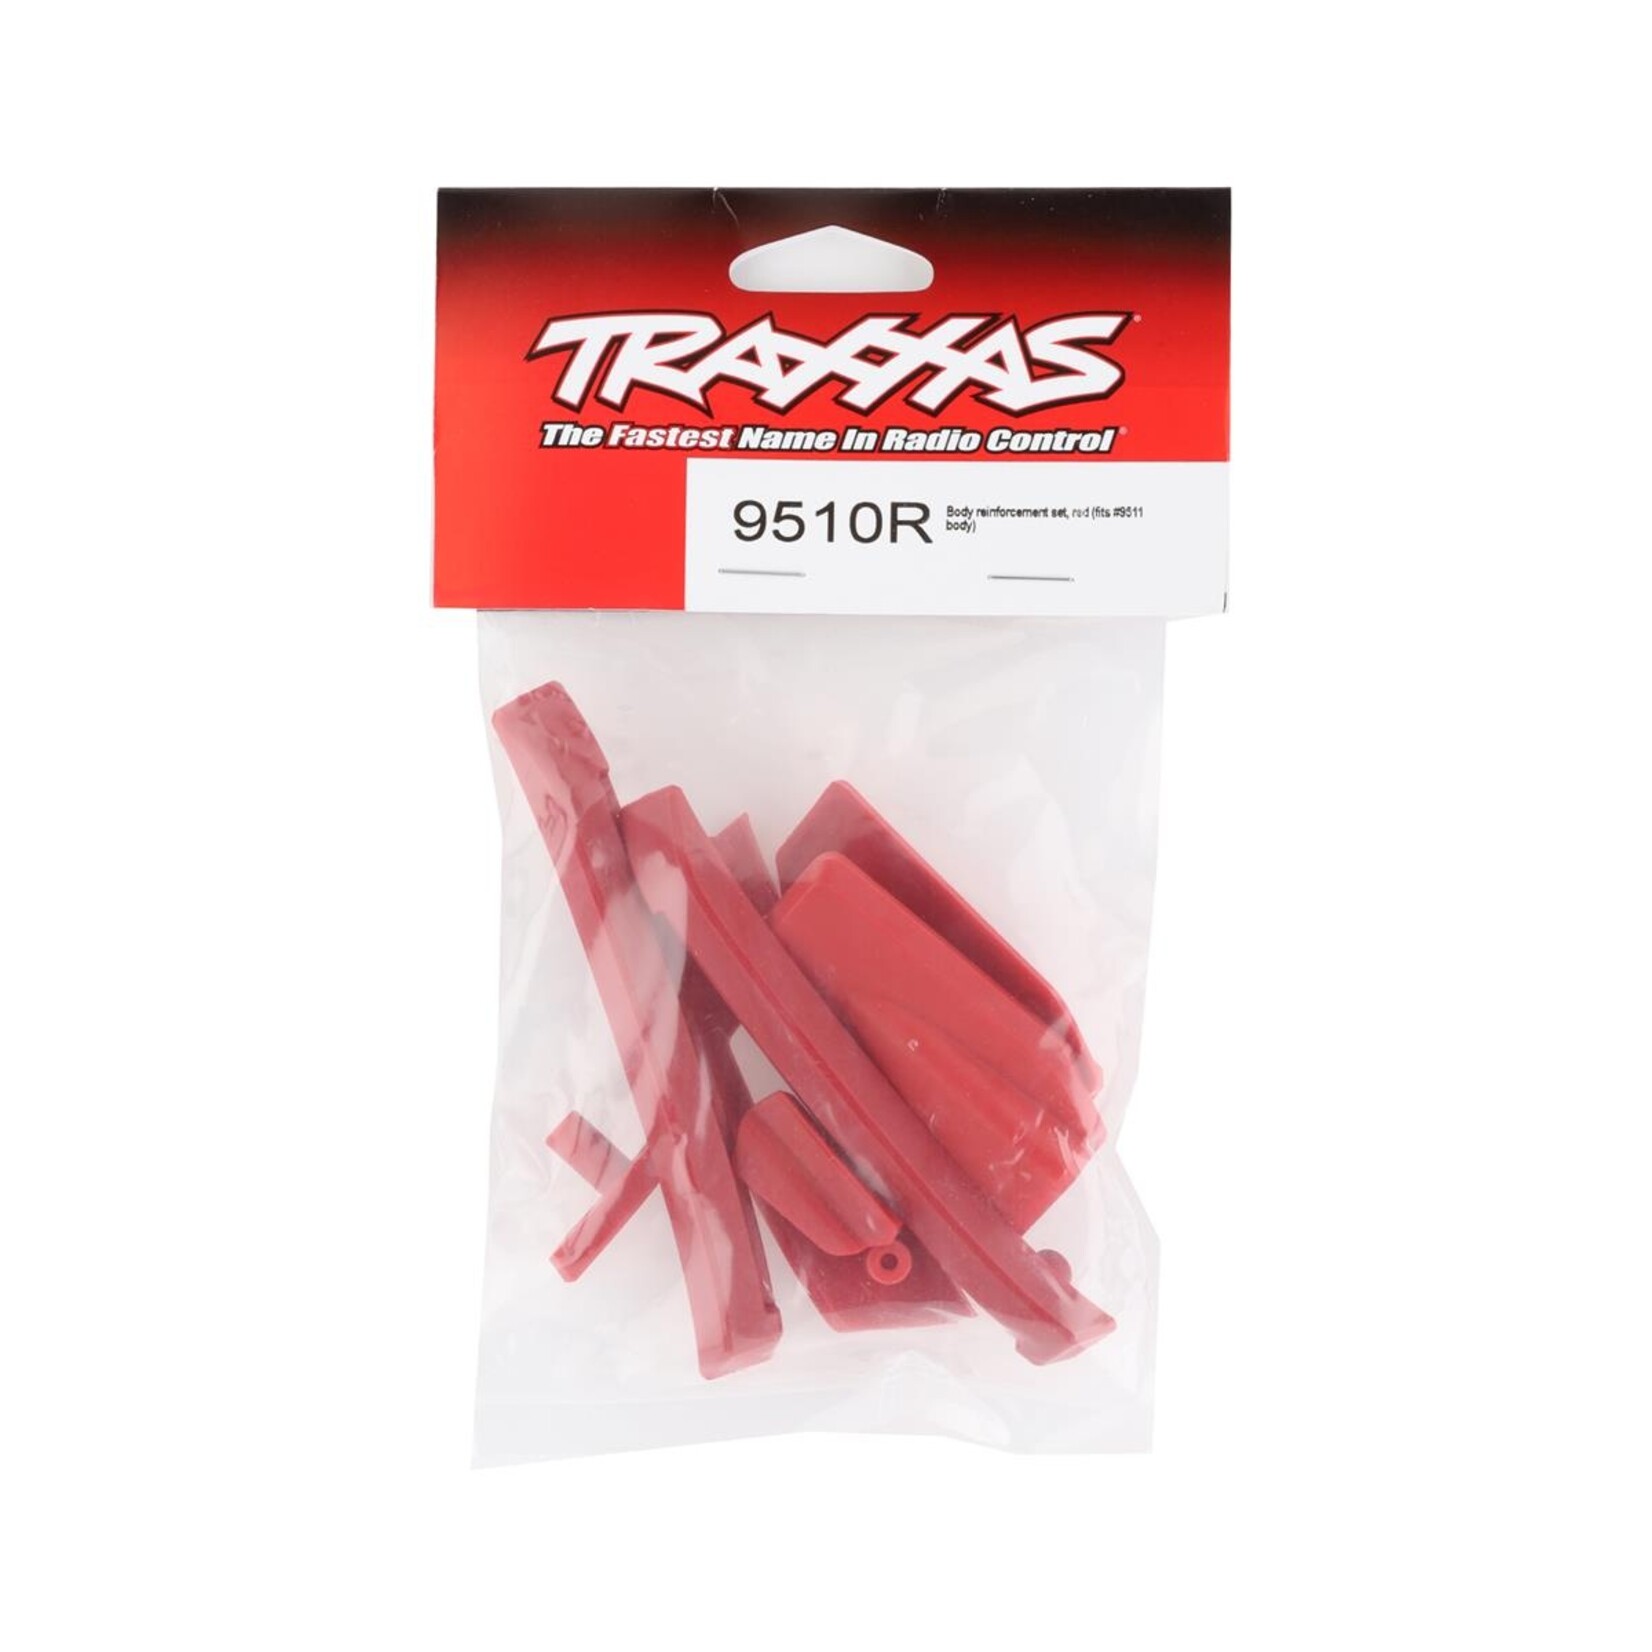 Traxxas Traxxas Sledge Body Roof Skid Pads (Red) #9510R